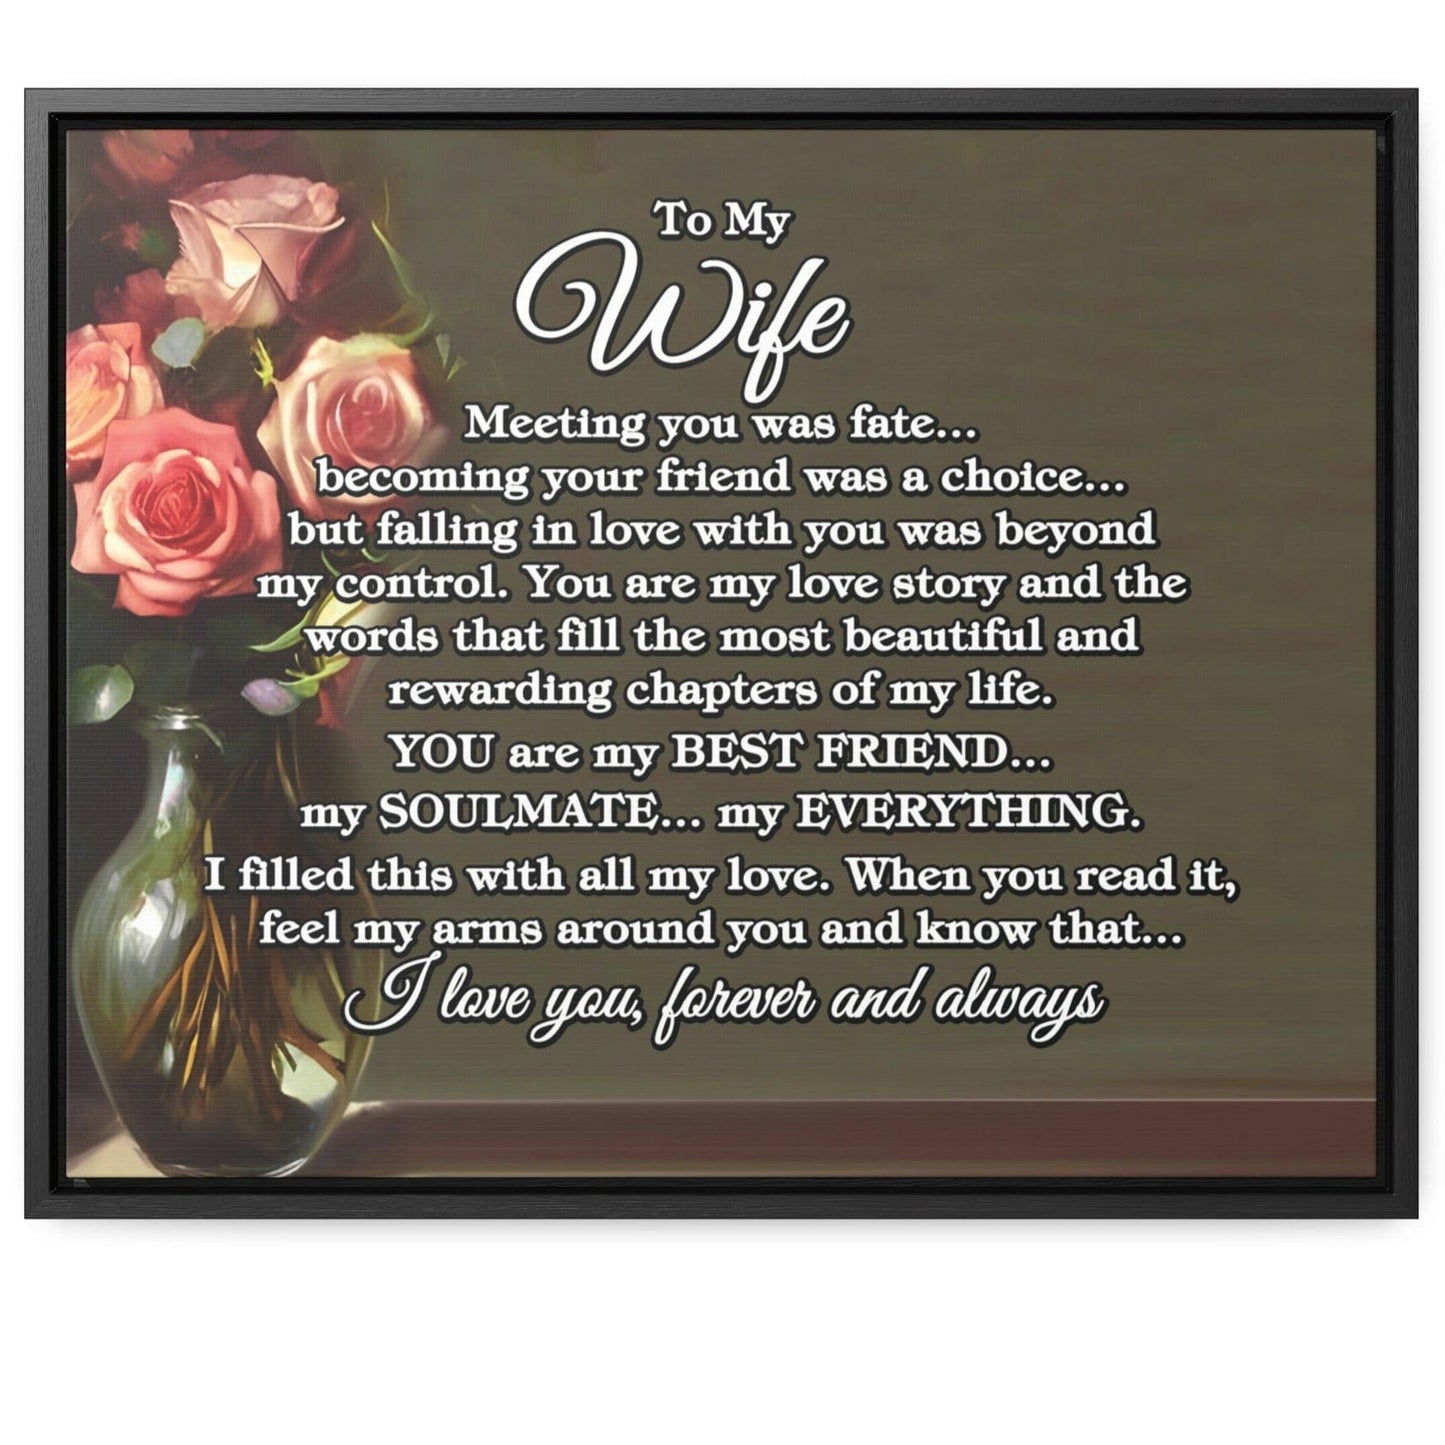 To My Wife "Meeting you was..." Framed Canvas (Roses)